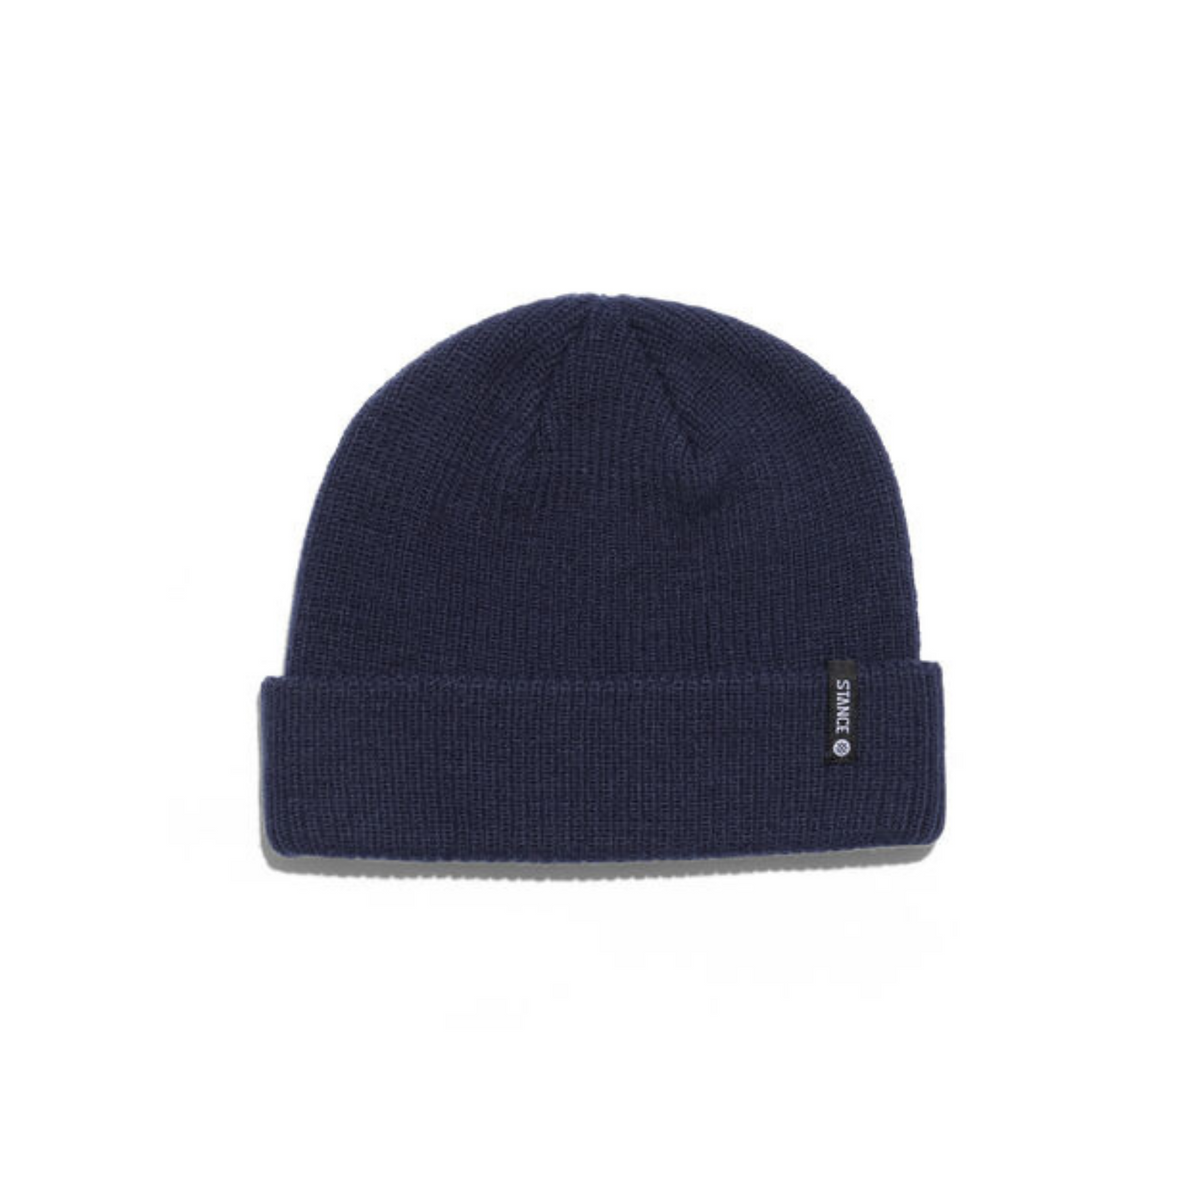 Stance Icon 2 Beanie in navy blue on display